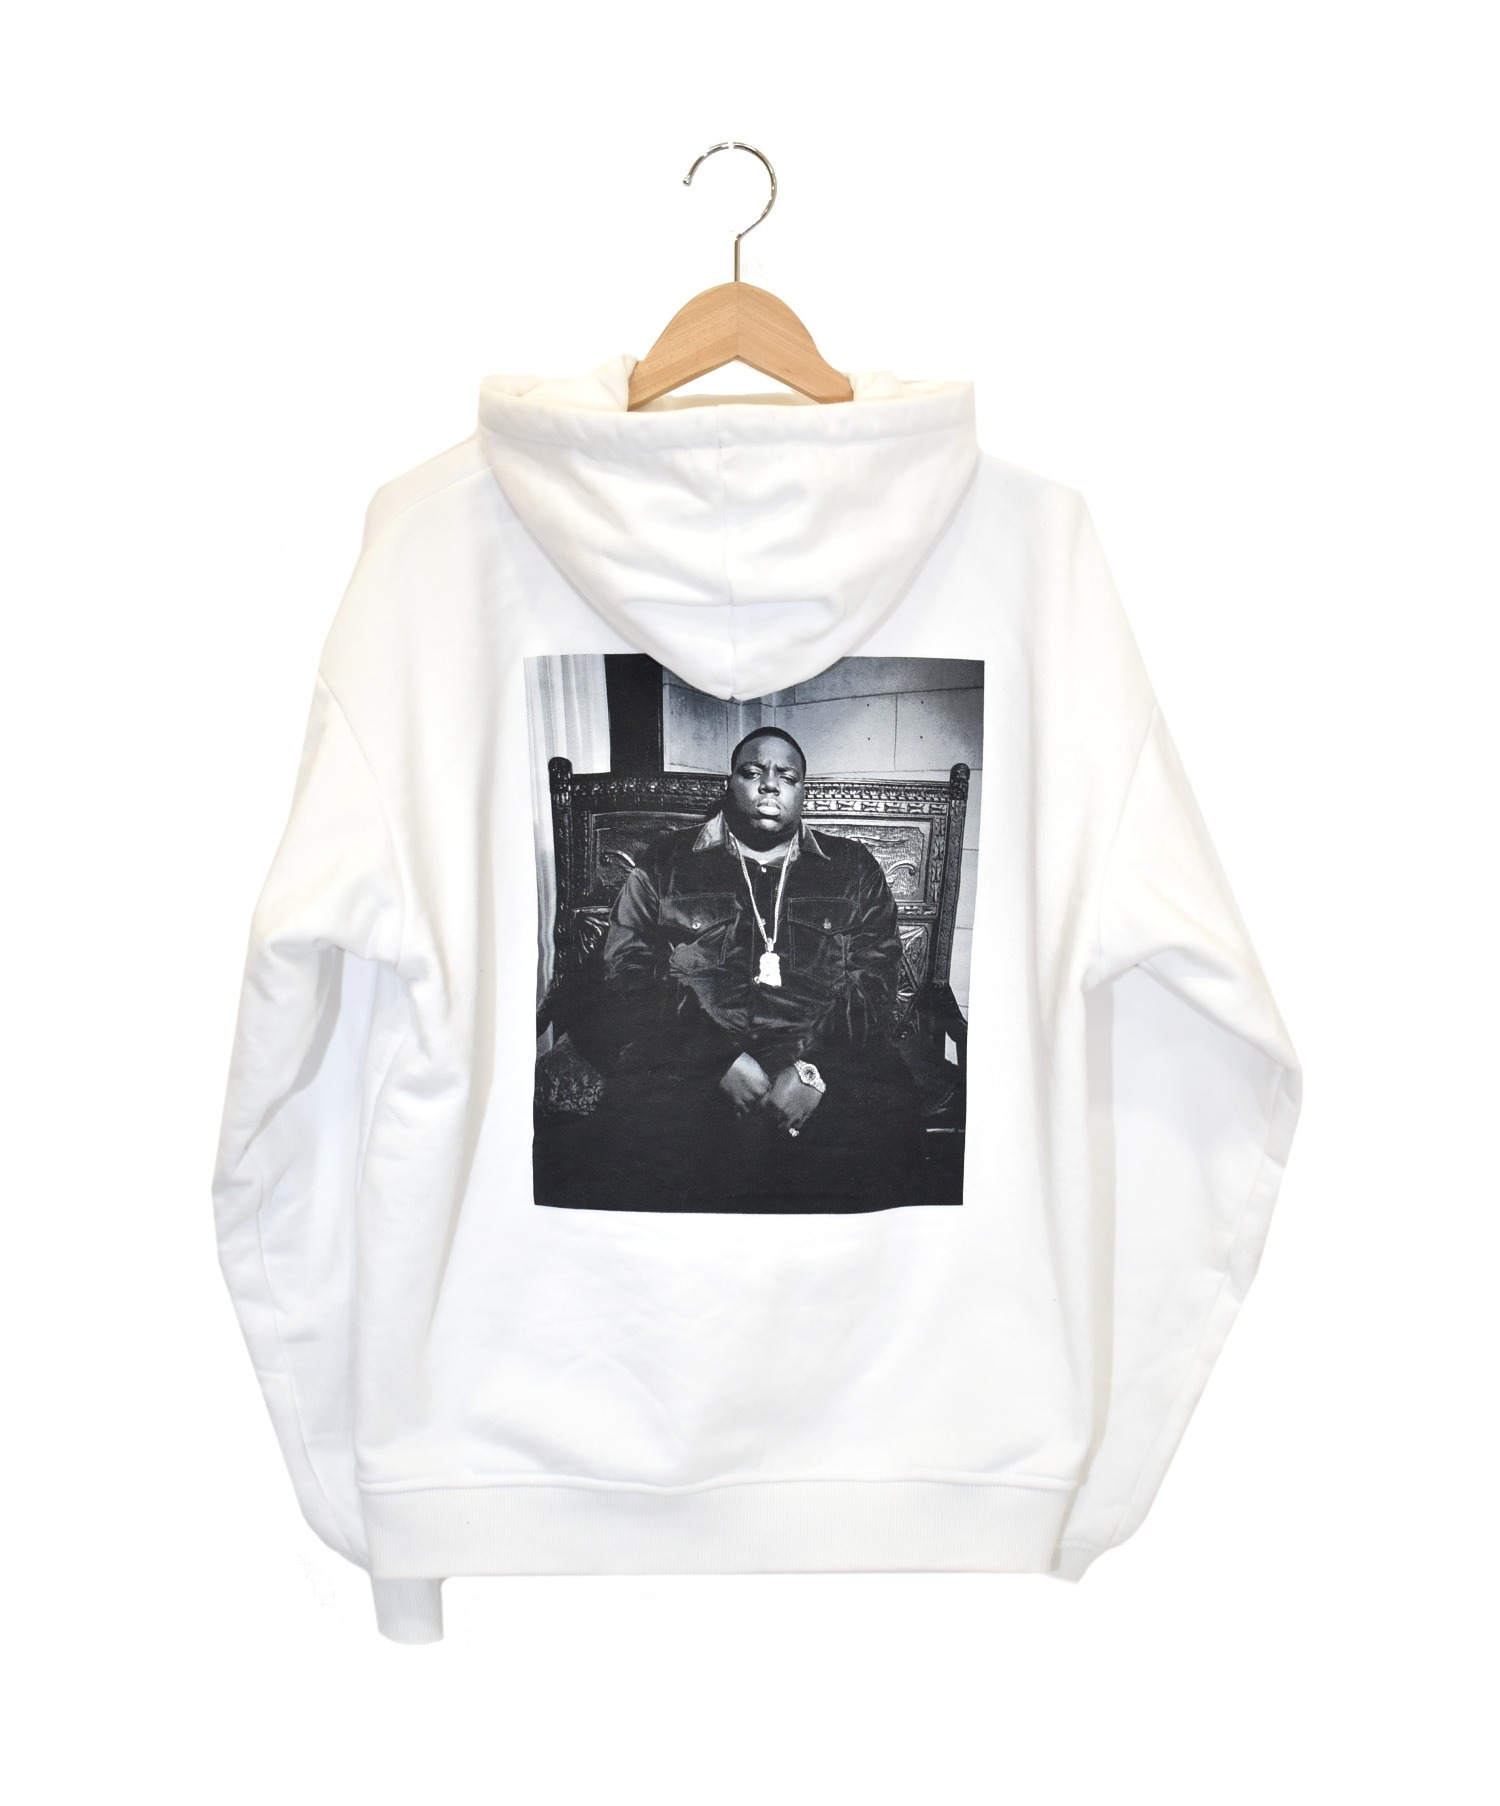 KITH × The Notorious B.I.G. (キス×ノトーリアスビッグ) プルオーバーパーカー ホワイト サイズ:M Life After  Death Hoodie